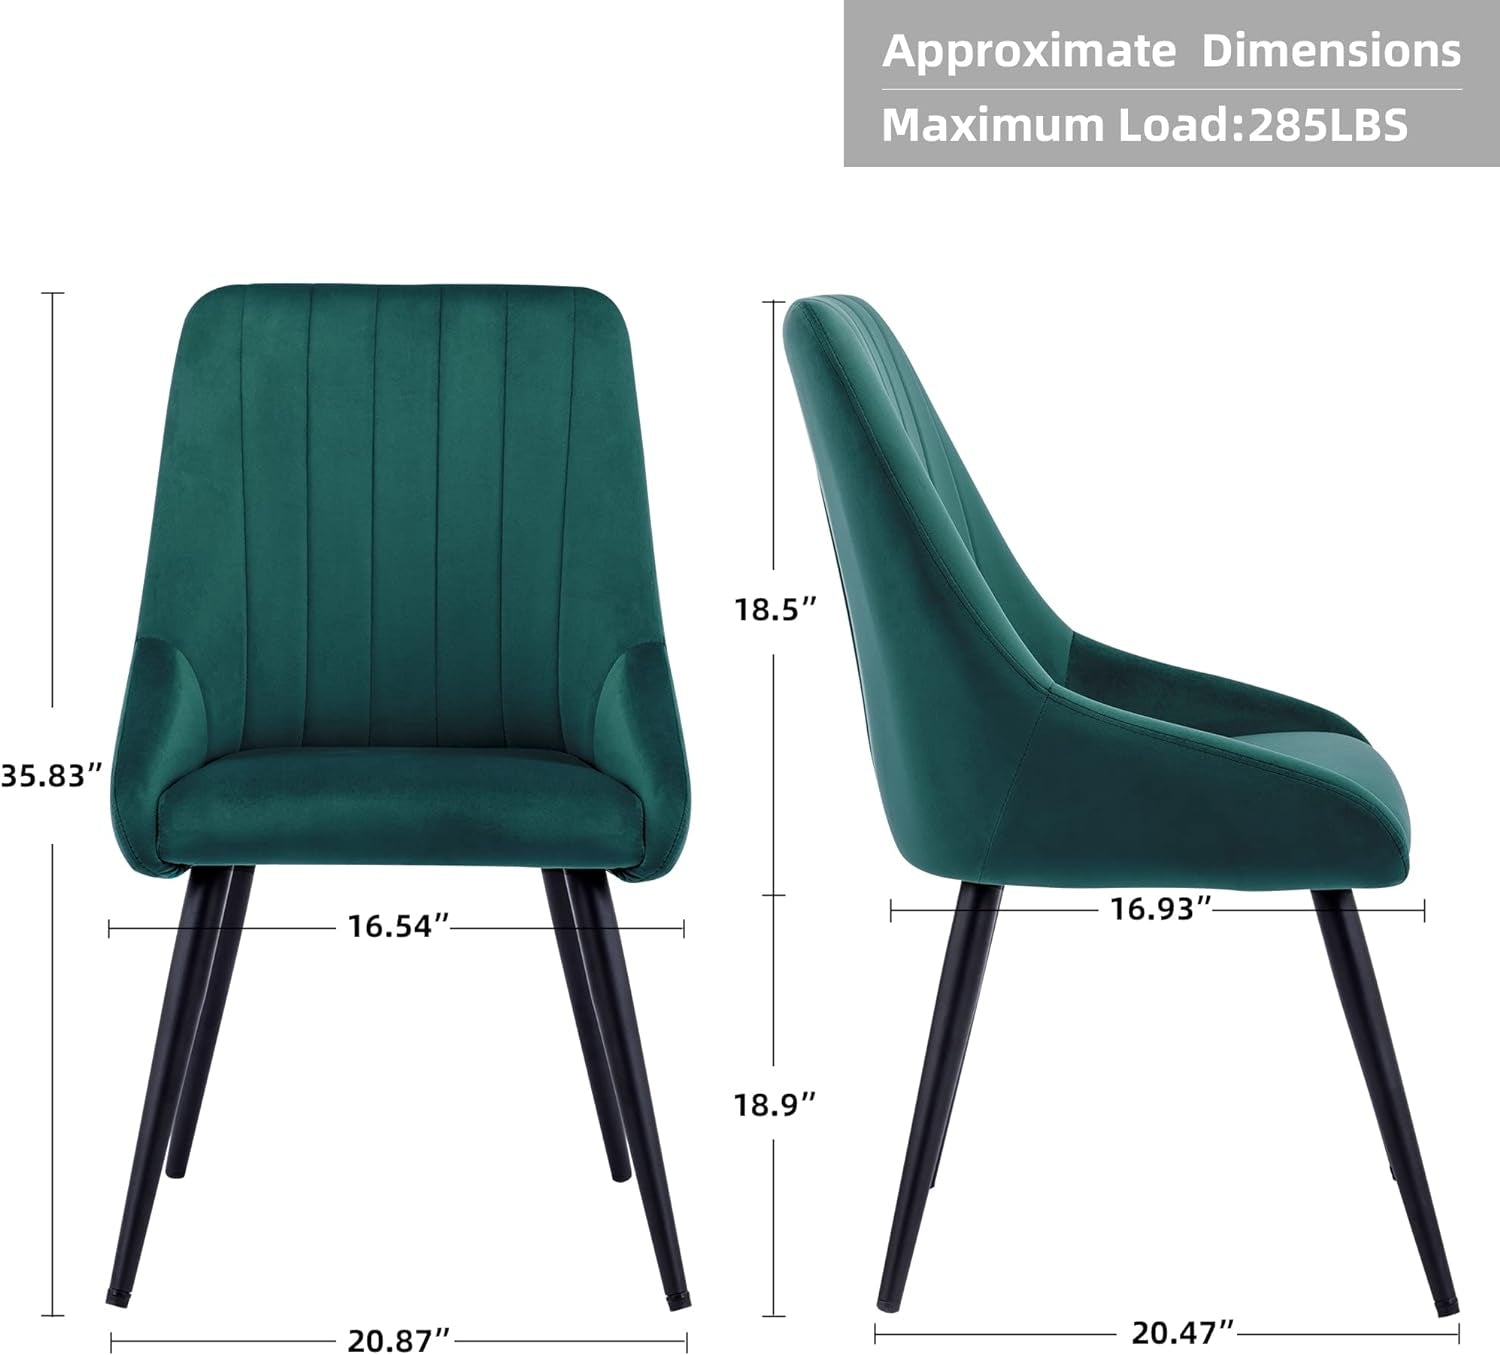 Dining Chairs Set of 2, Upholstered Tufted Accent Chair Leisure Chair Mid Century High-Back Modern Velvet Chair for Dining Room Living Room Bedroom Coffee Dark Green